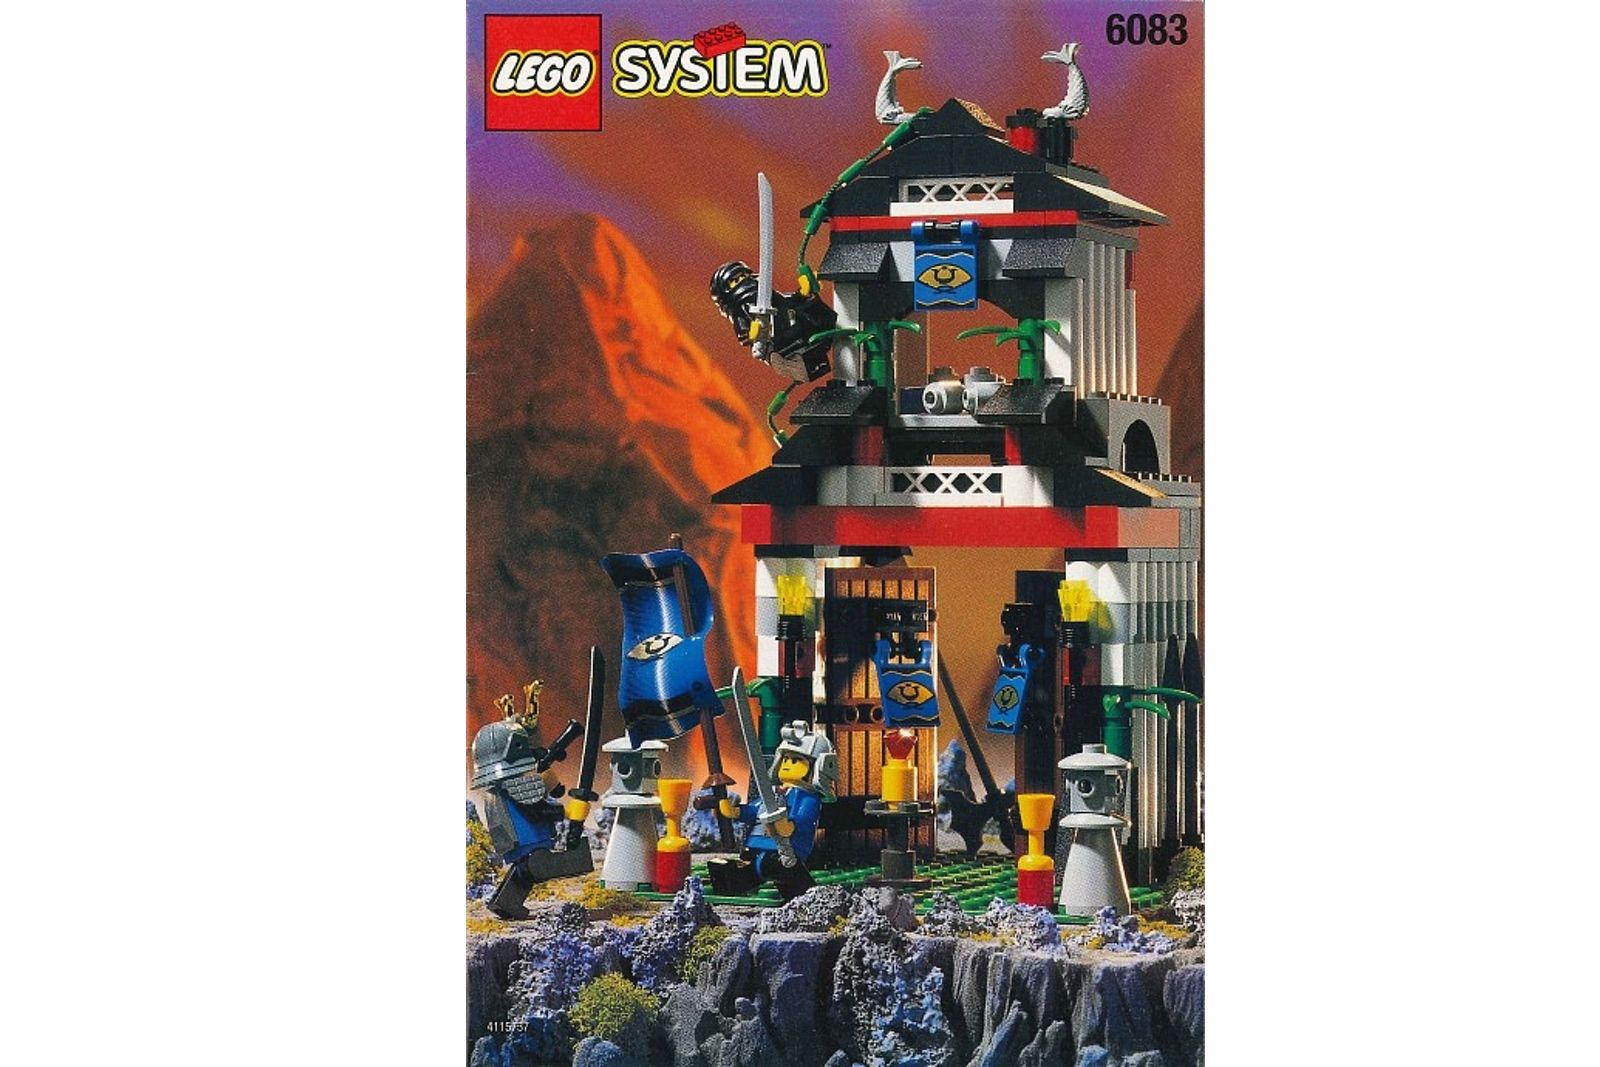 Remember These The Best Lego Sets Of All Time image 122